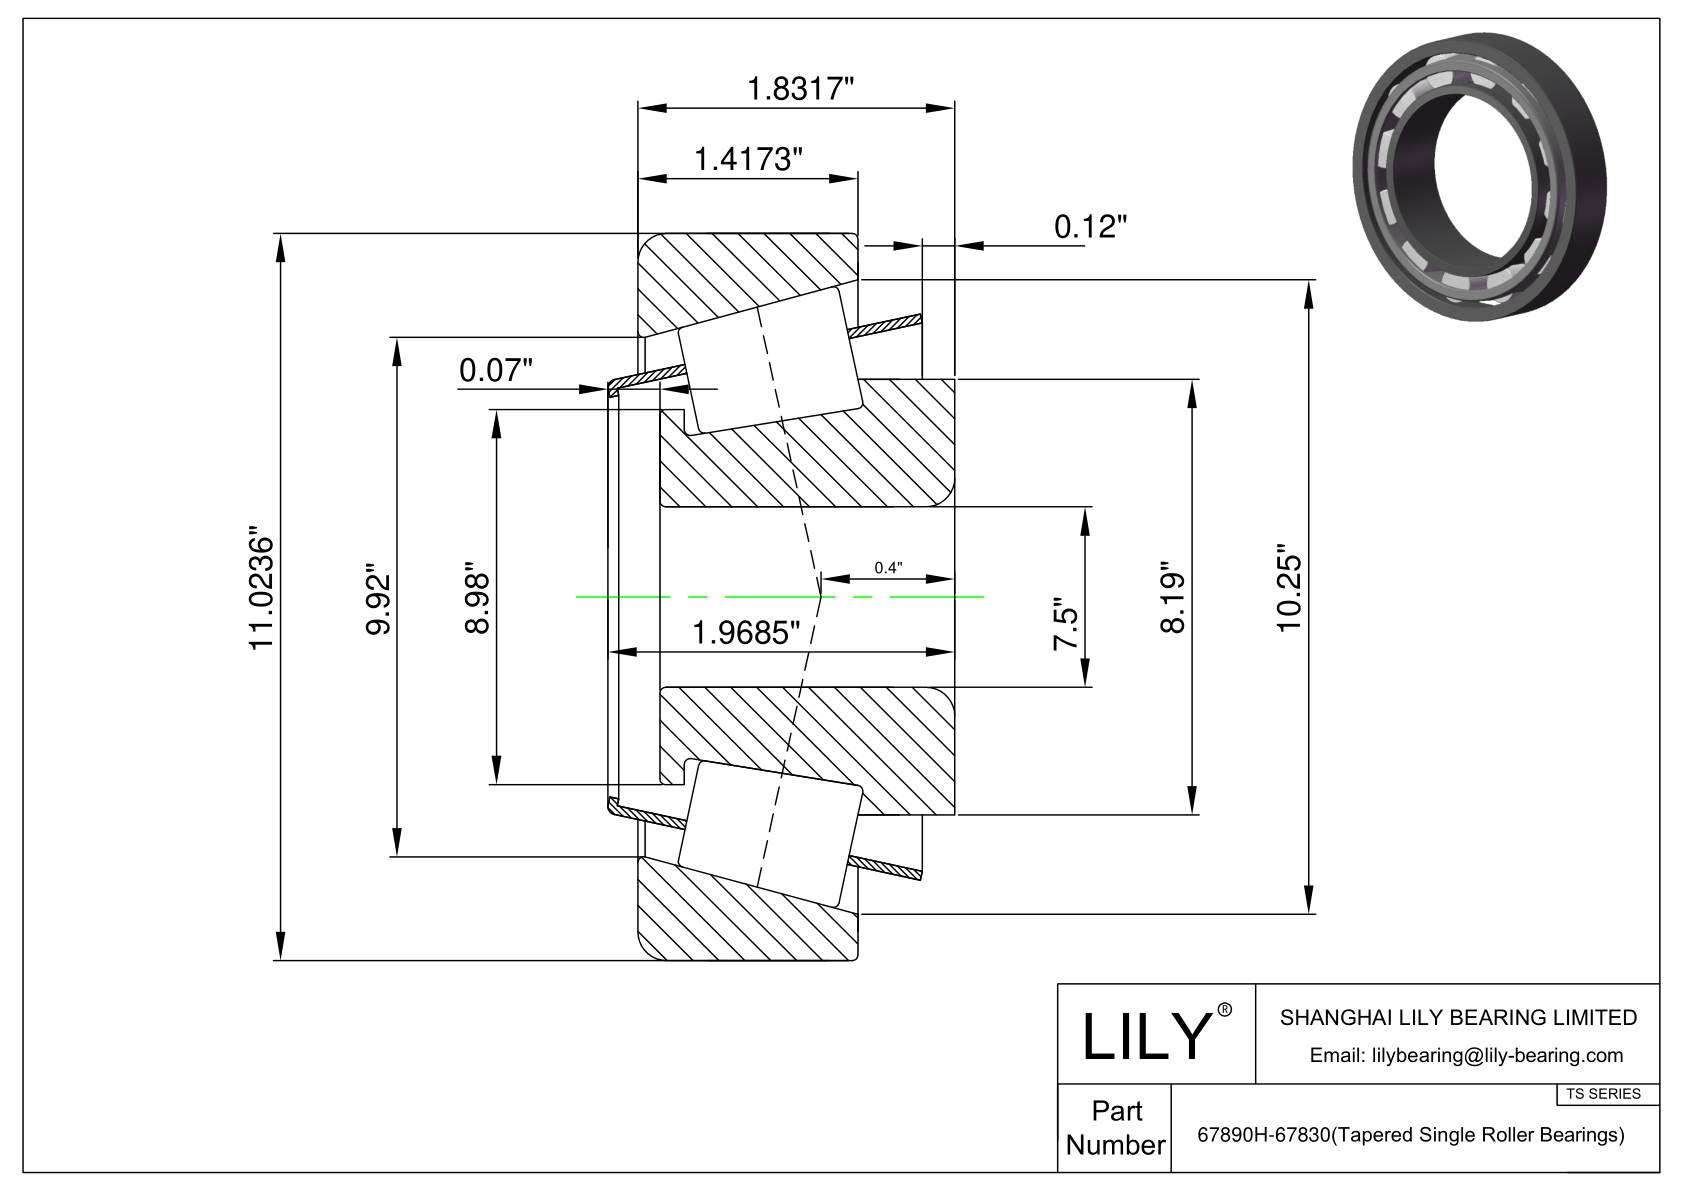 67890H-67830 TS (Tapered Single Roller Bearings) (Imperial) cad drawing